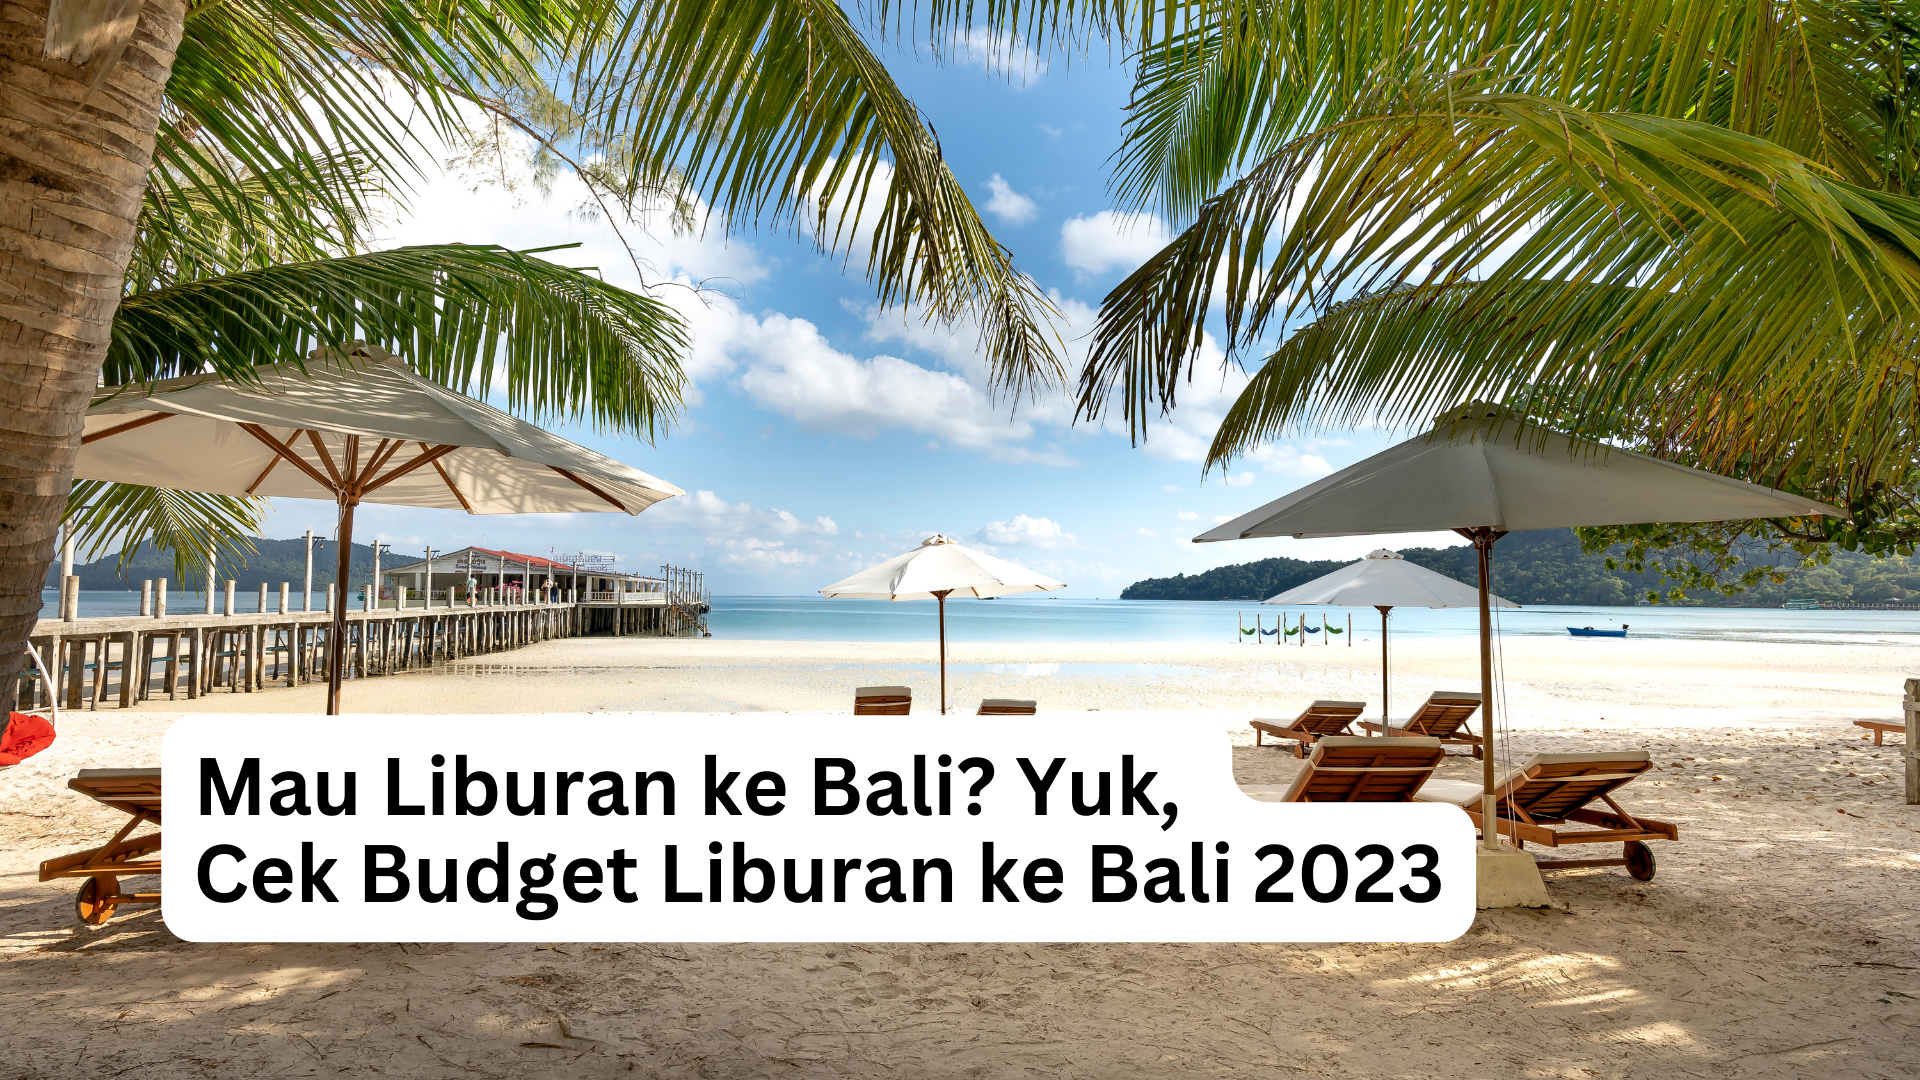 You are currently viewing <strong>Mau Liburan ke Bali? Yuk, Cek Budget Liburan ke Bali 2023</strong>